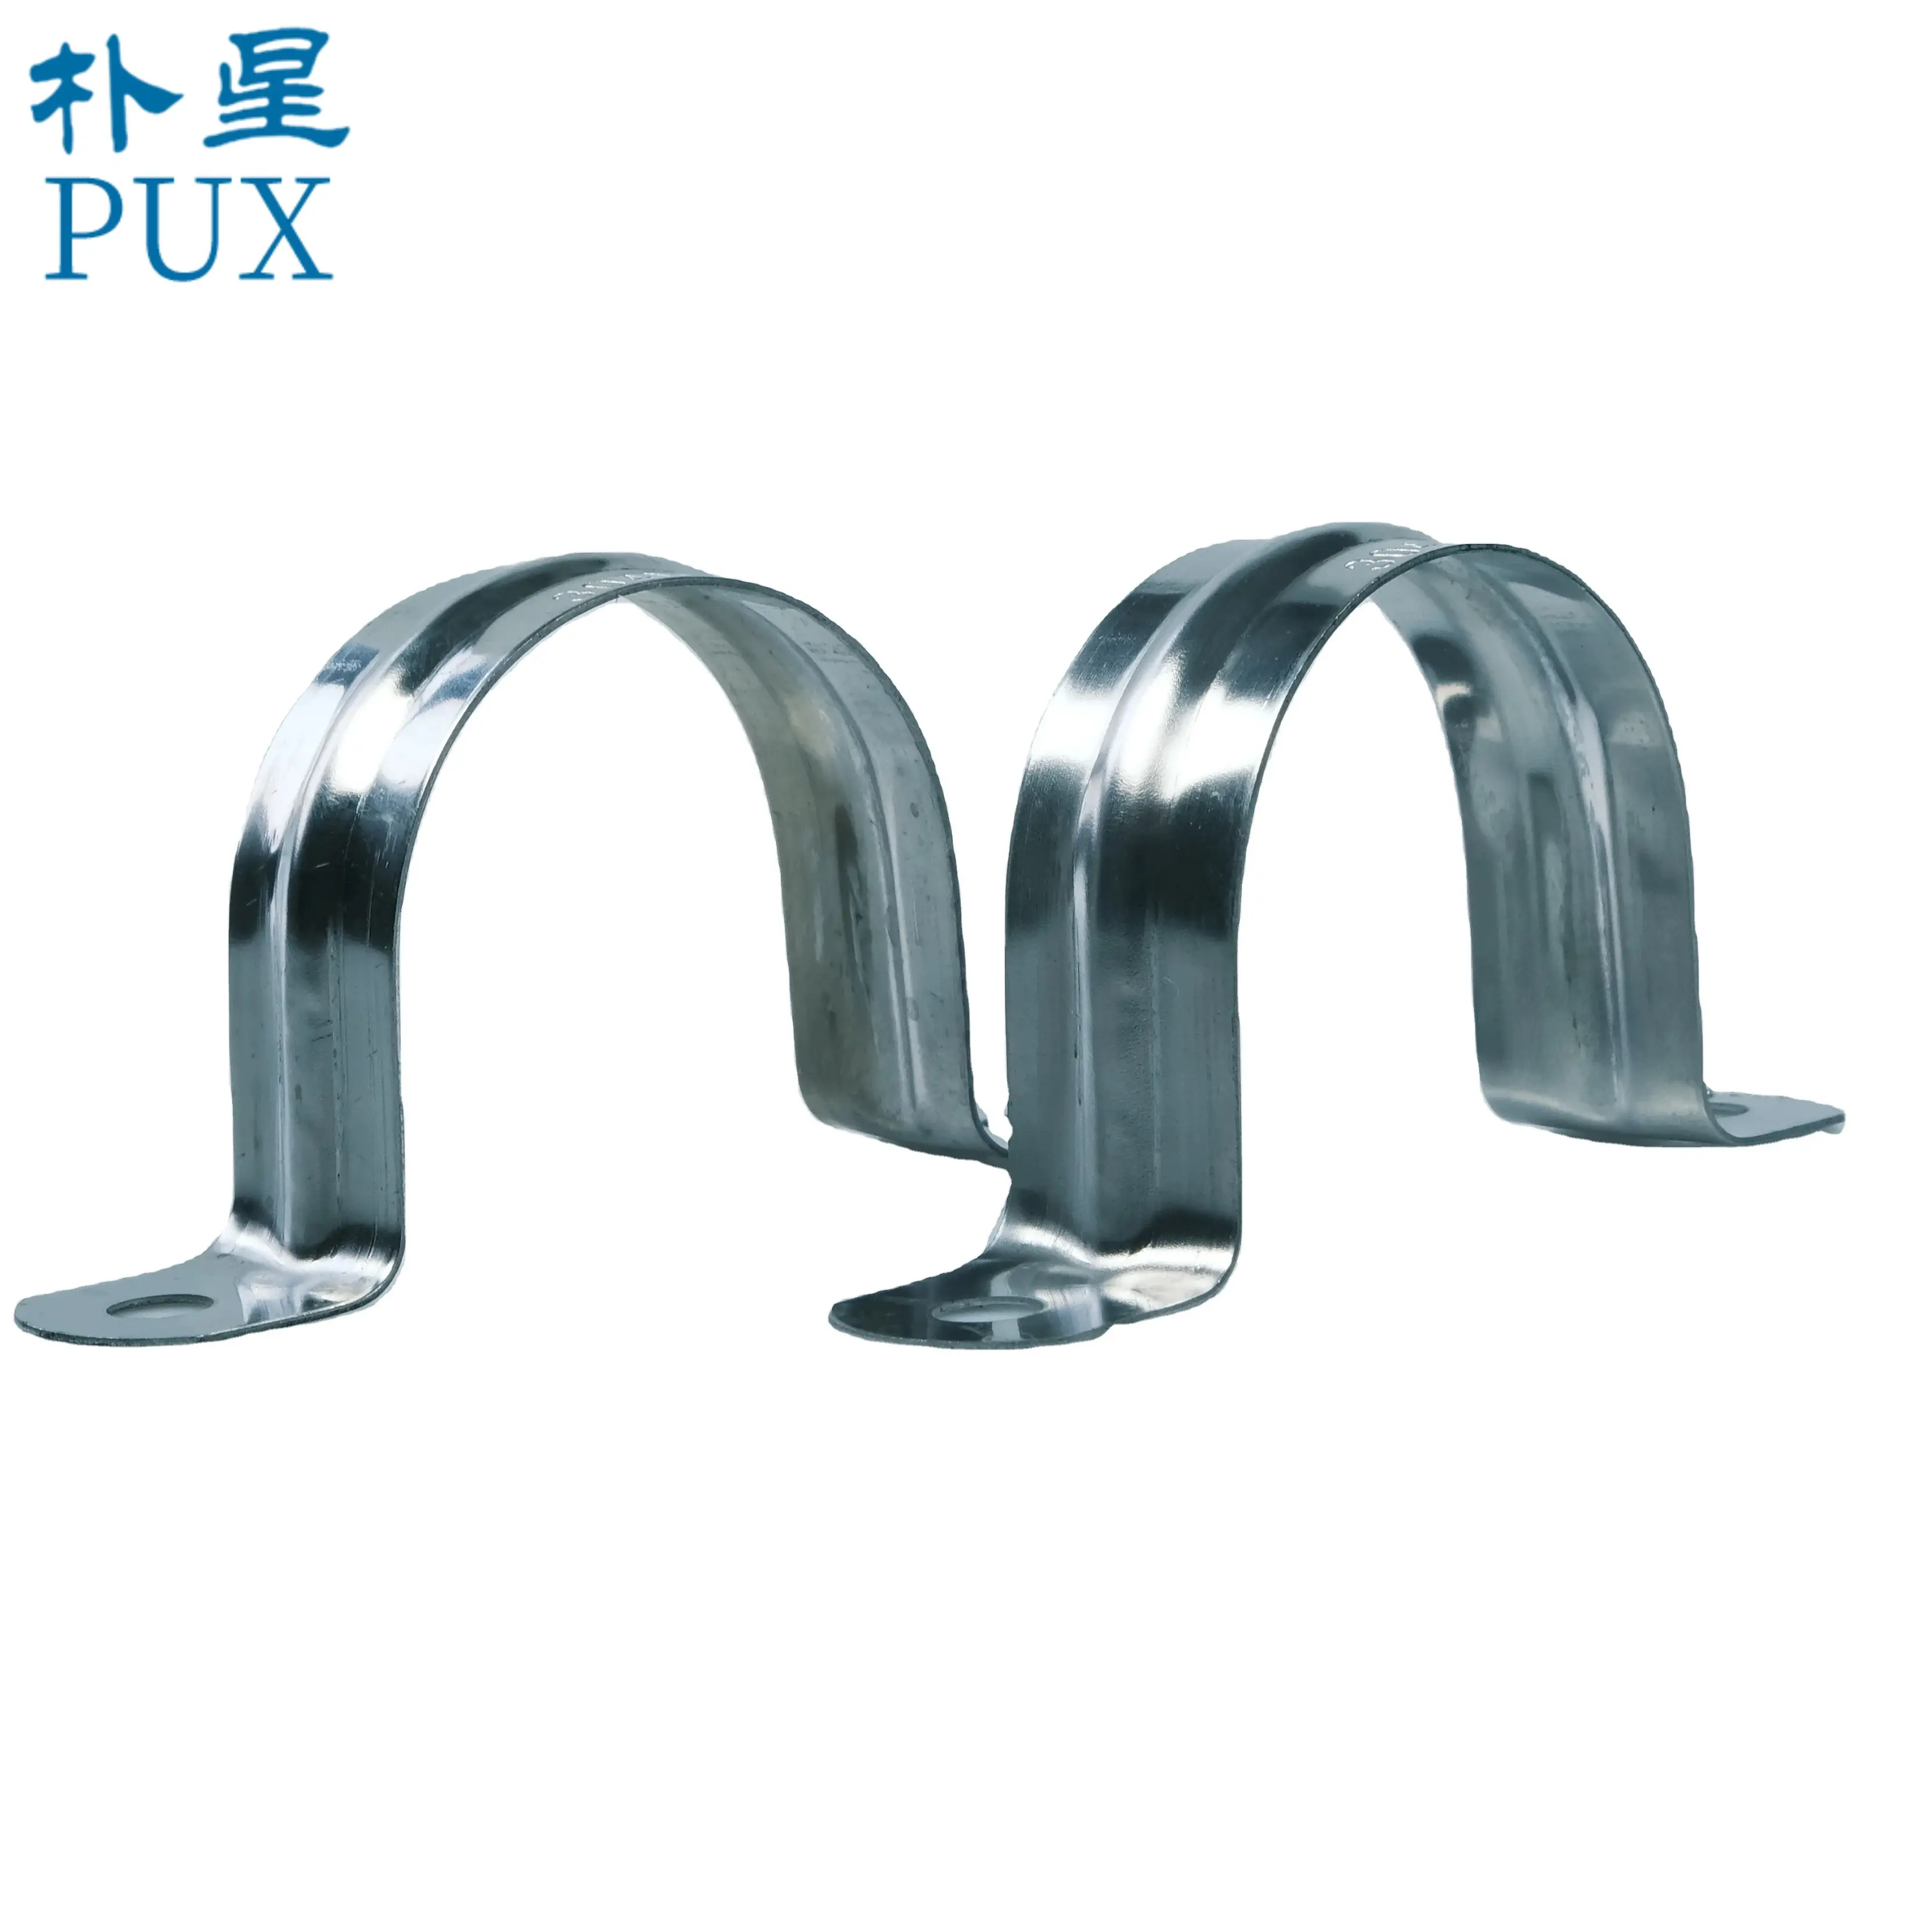 PUX Factory Direct Selling Metal Pipe Clamp Water Pipe Saddle Clip 304 Stainless Steel U Pipe Clamp Wire Fixed Saddle